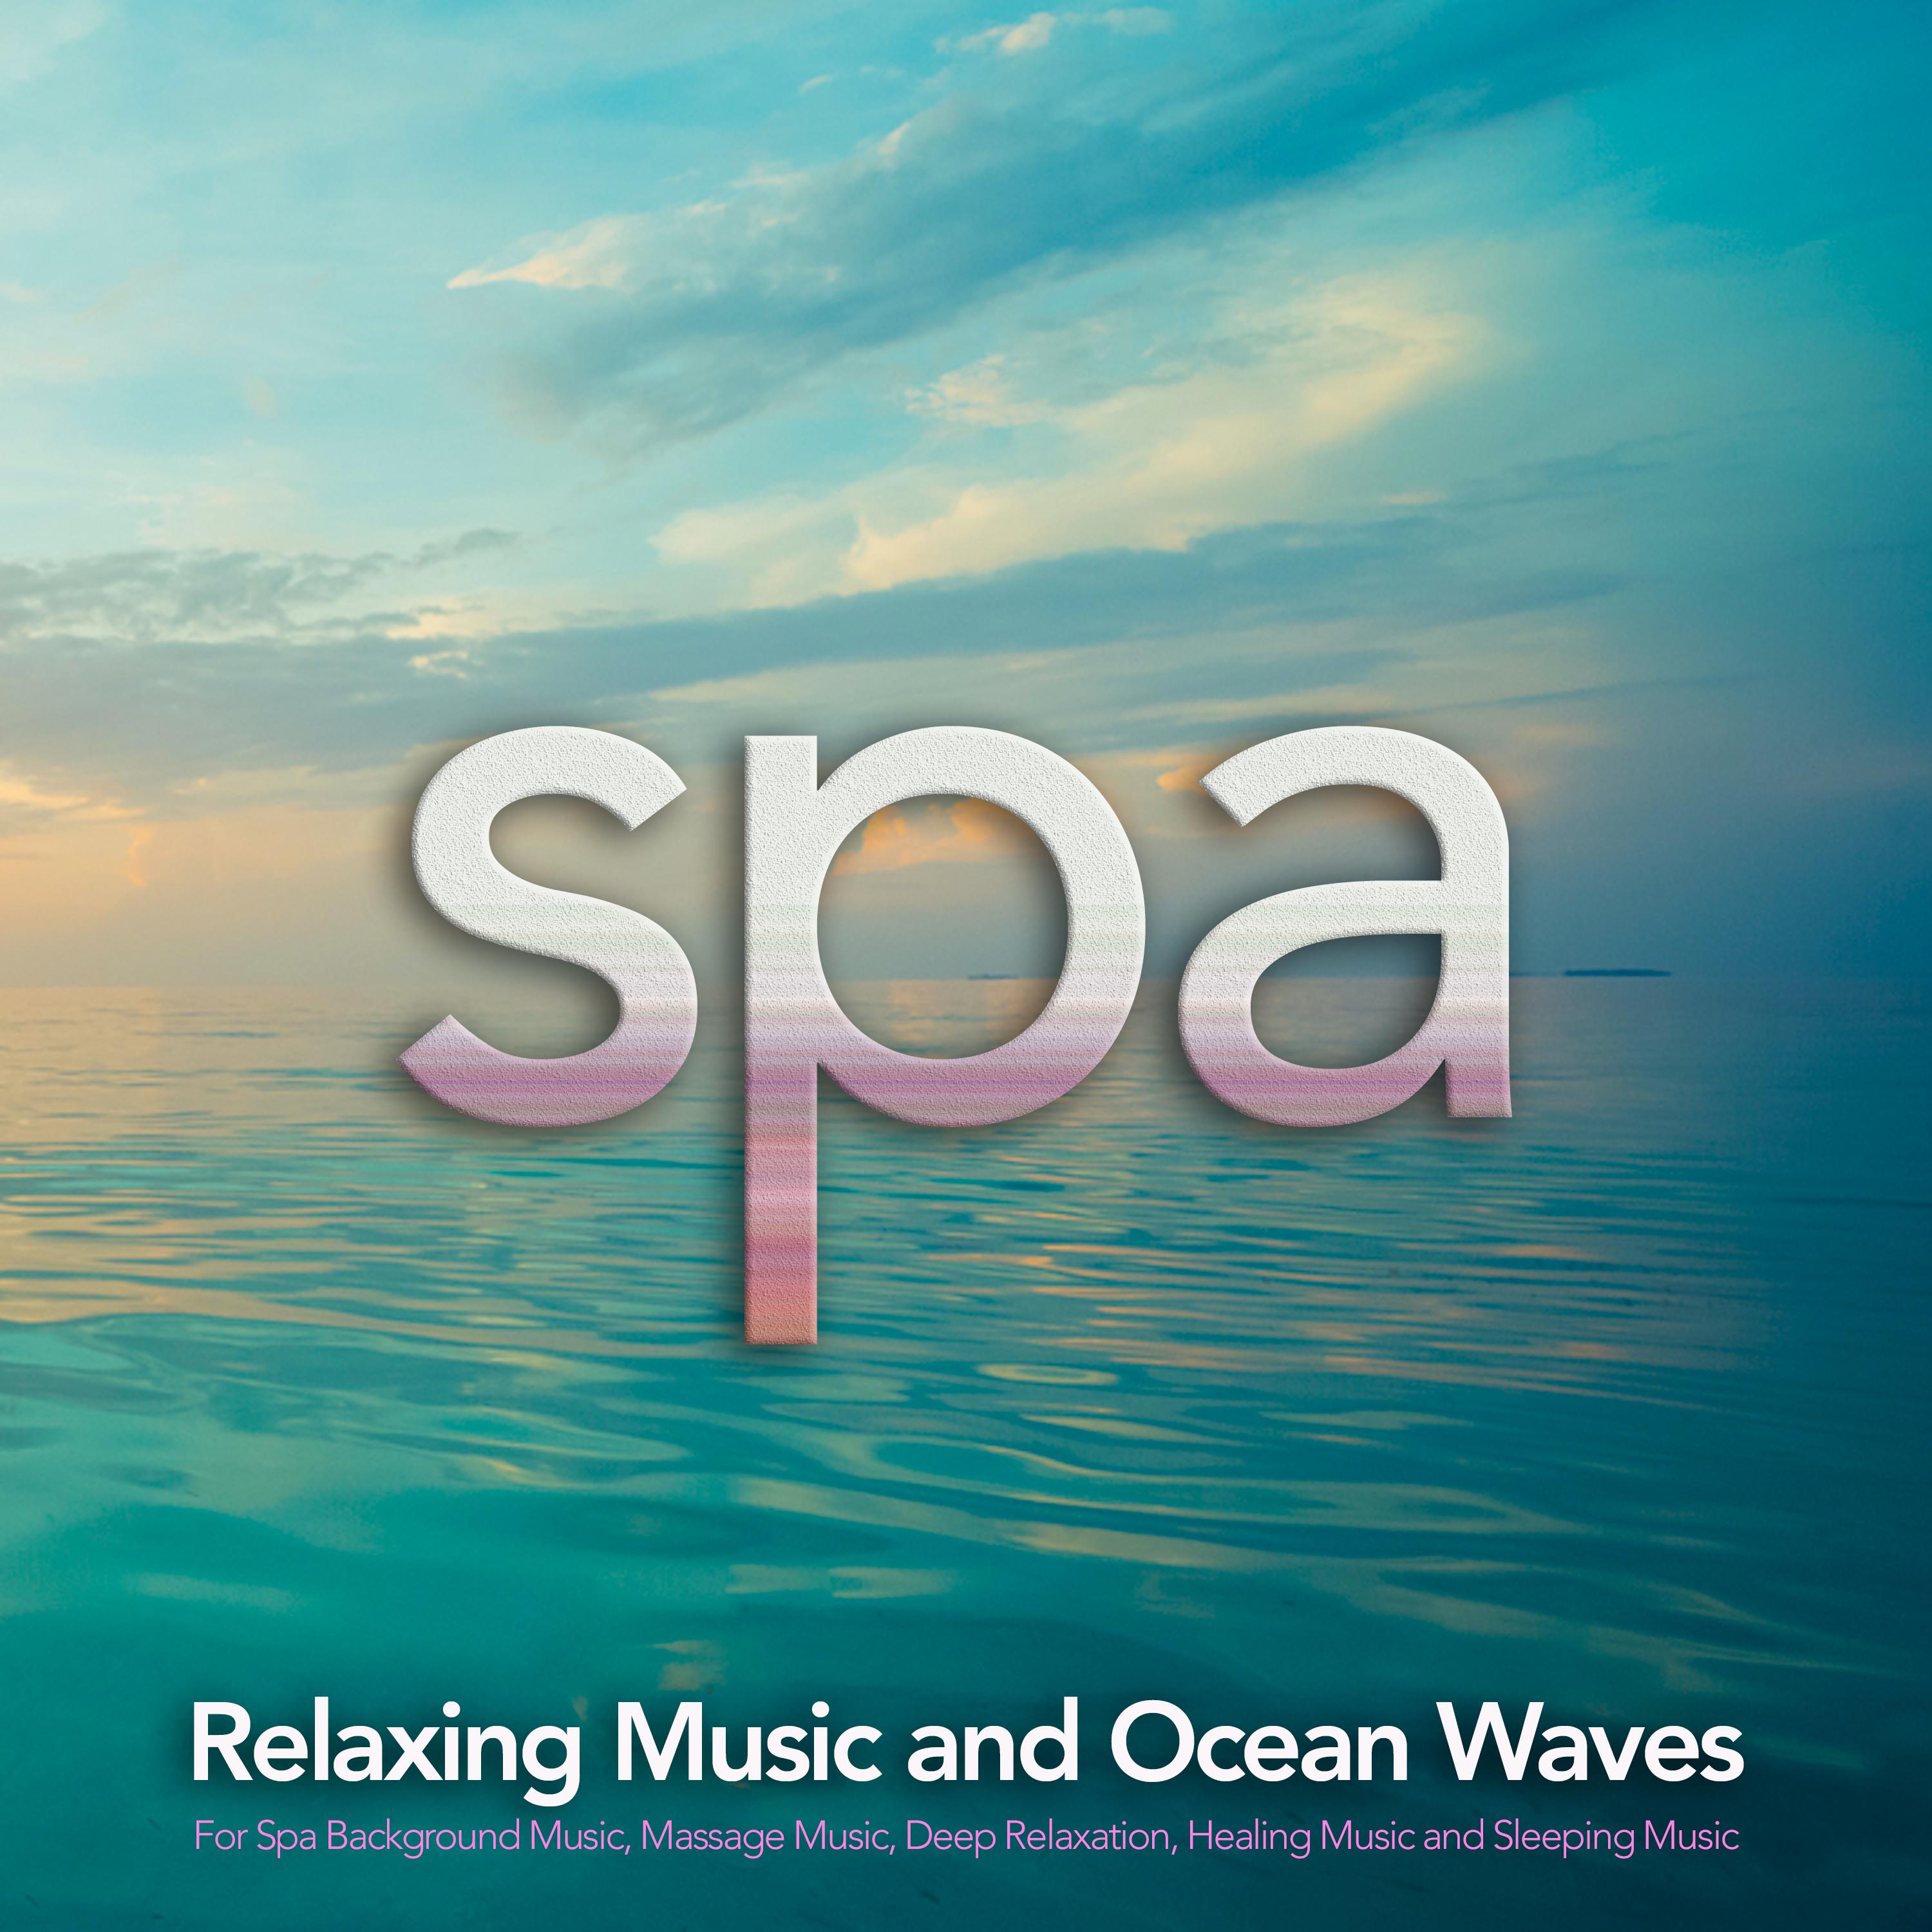 Ocean Waves and Music For Spa